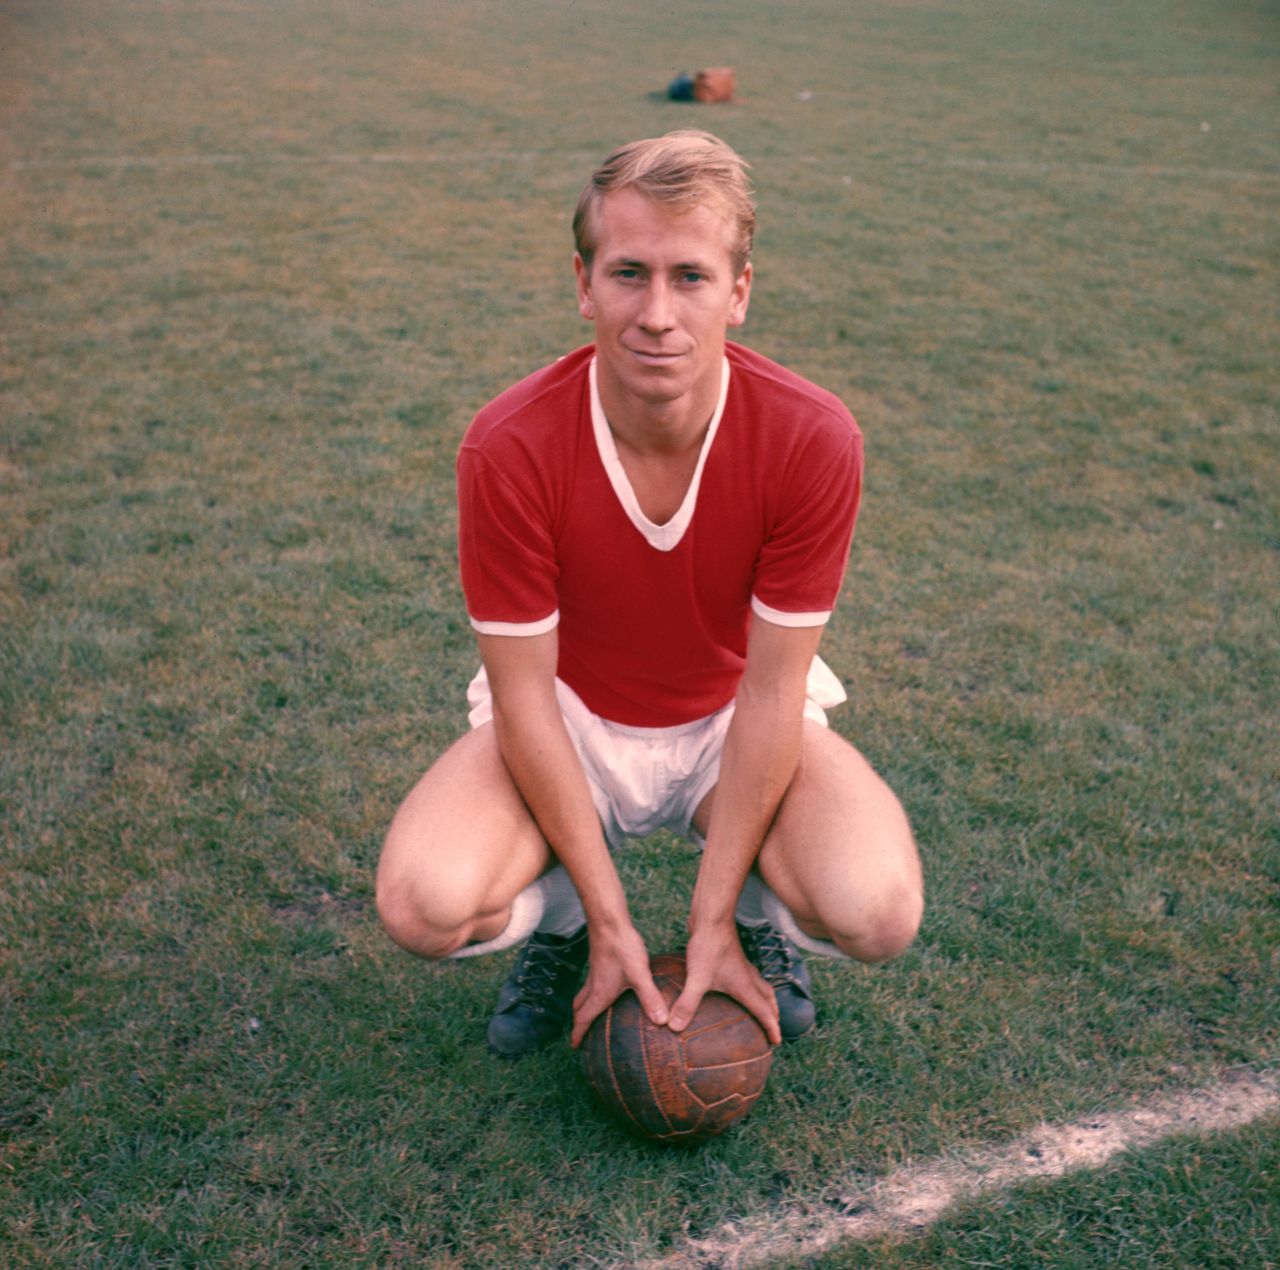 After survivng the Munich Air Crash at the age of 20, Bobby Charlton went on to become both a local and national hero for club and country. He scored 249 goals in 758 appearances for Manchester United during a 17-year playing career. He won three league titles, the 1963 FA Cup and 1968 European Cup. He was also a key member of the England side which won the World Cup on home soil in 1966 and he remains the country's top scorer to this very day with 49 international goals.